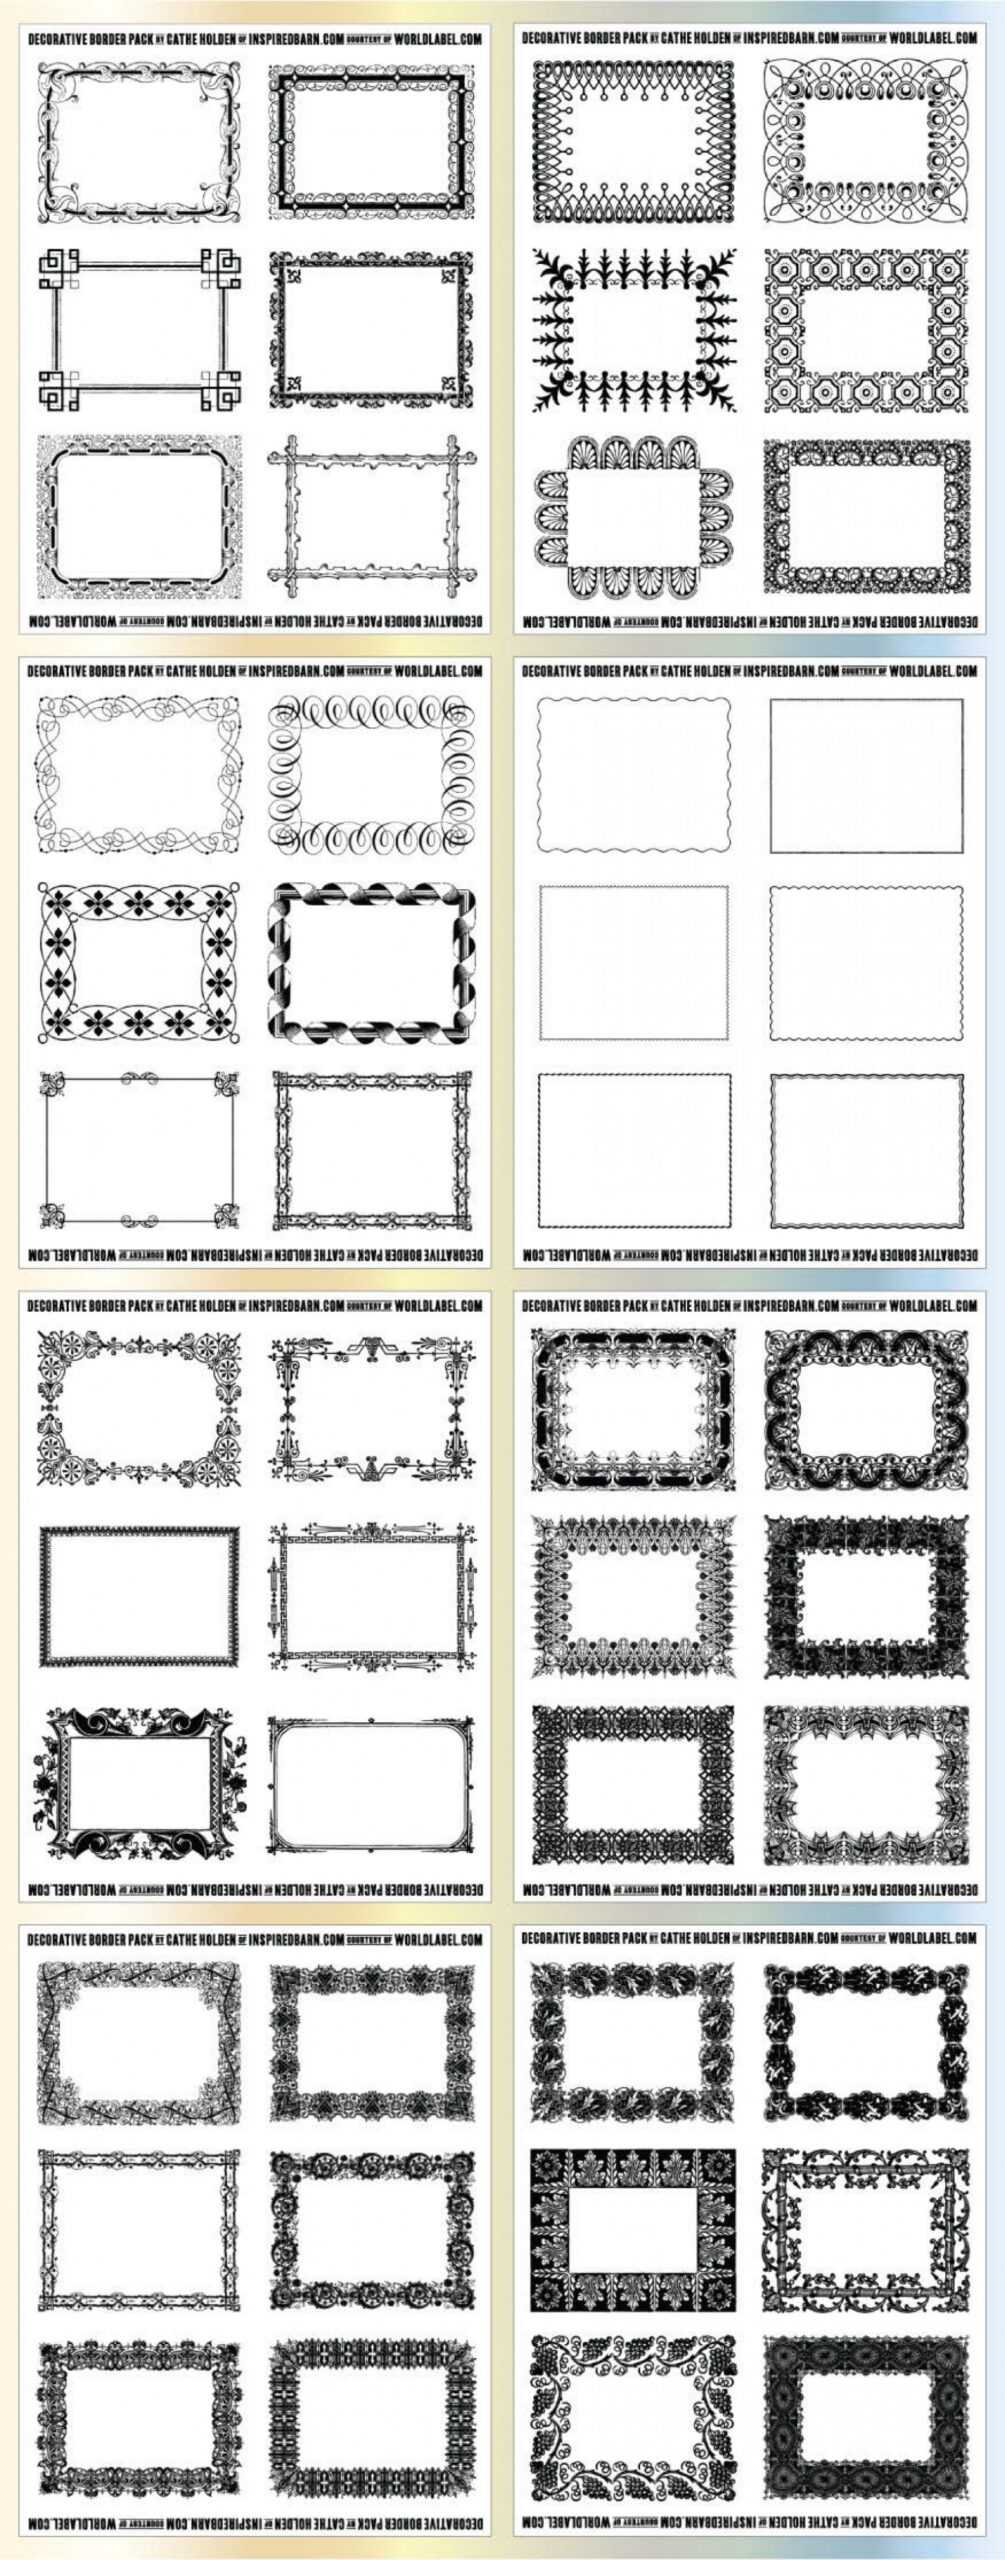 Free Printable Label Template ~ Addictionary inside Decorative Label Templates Free